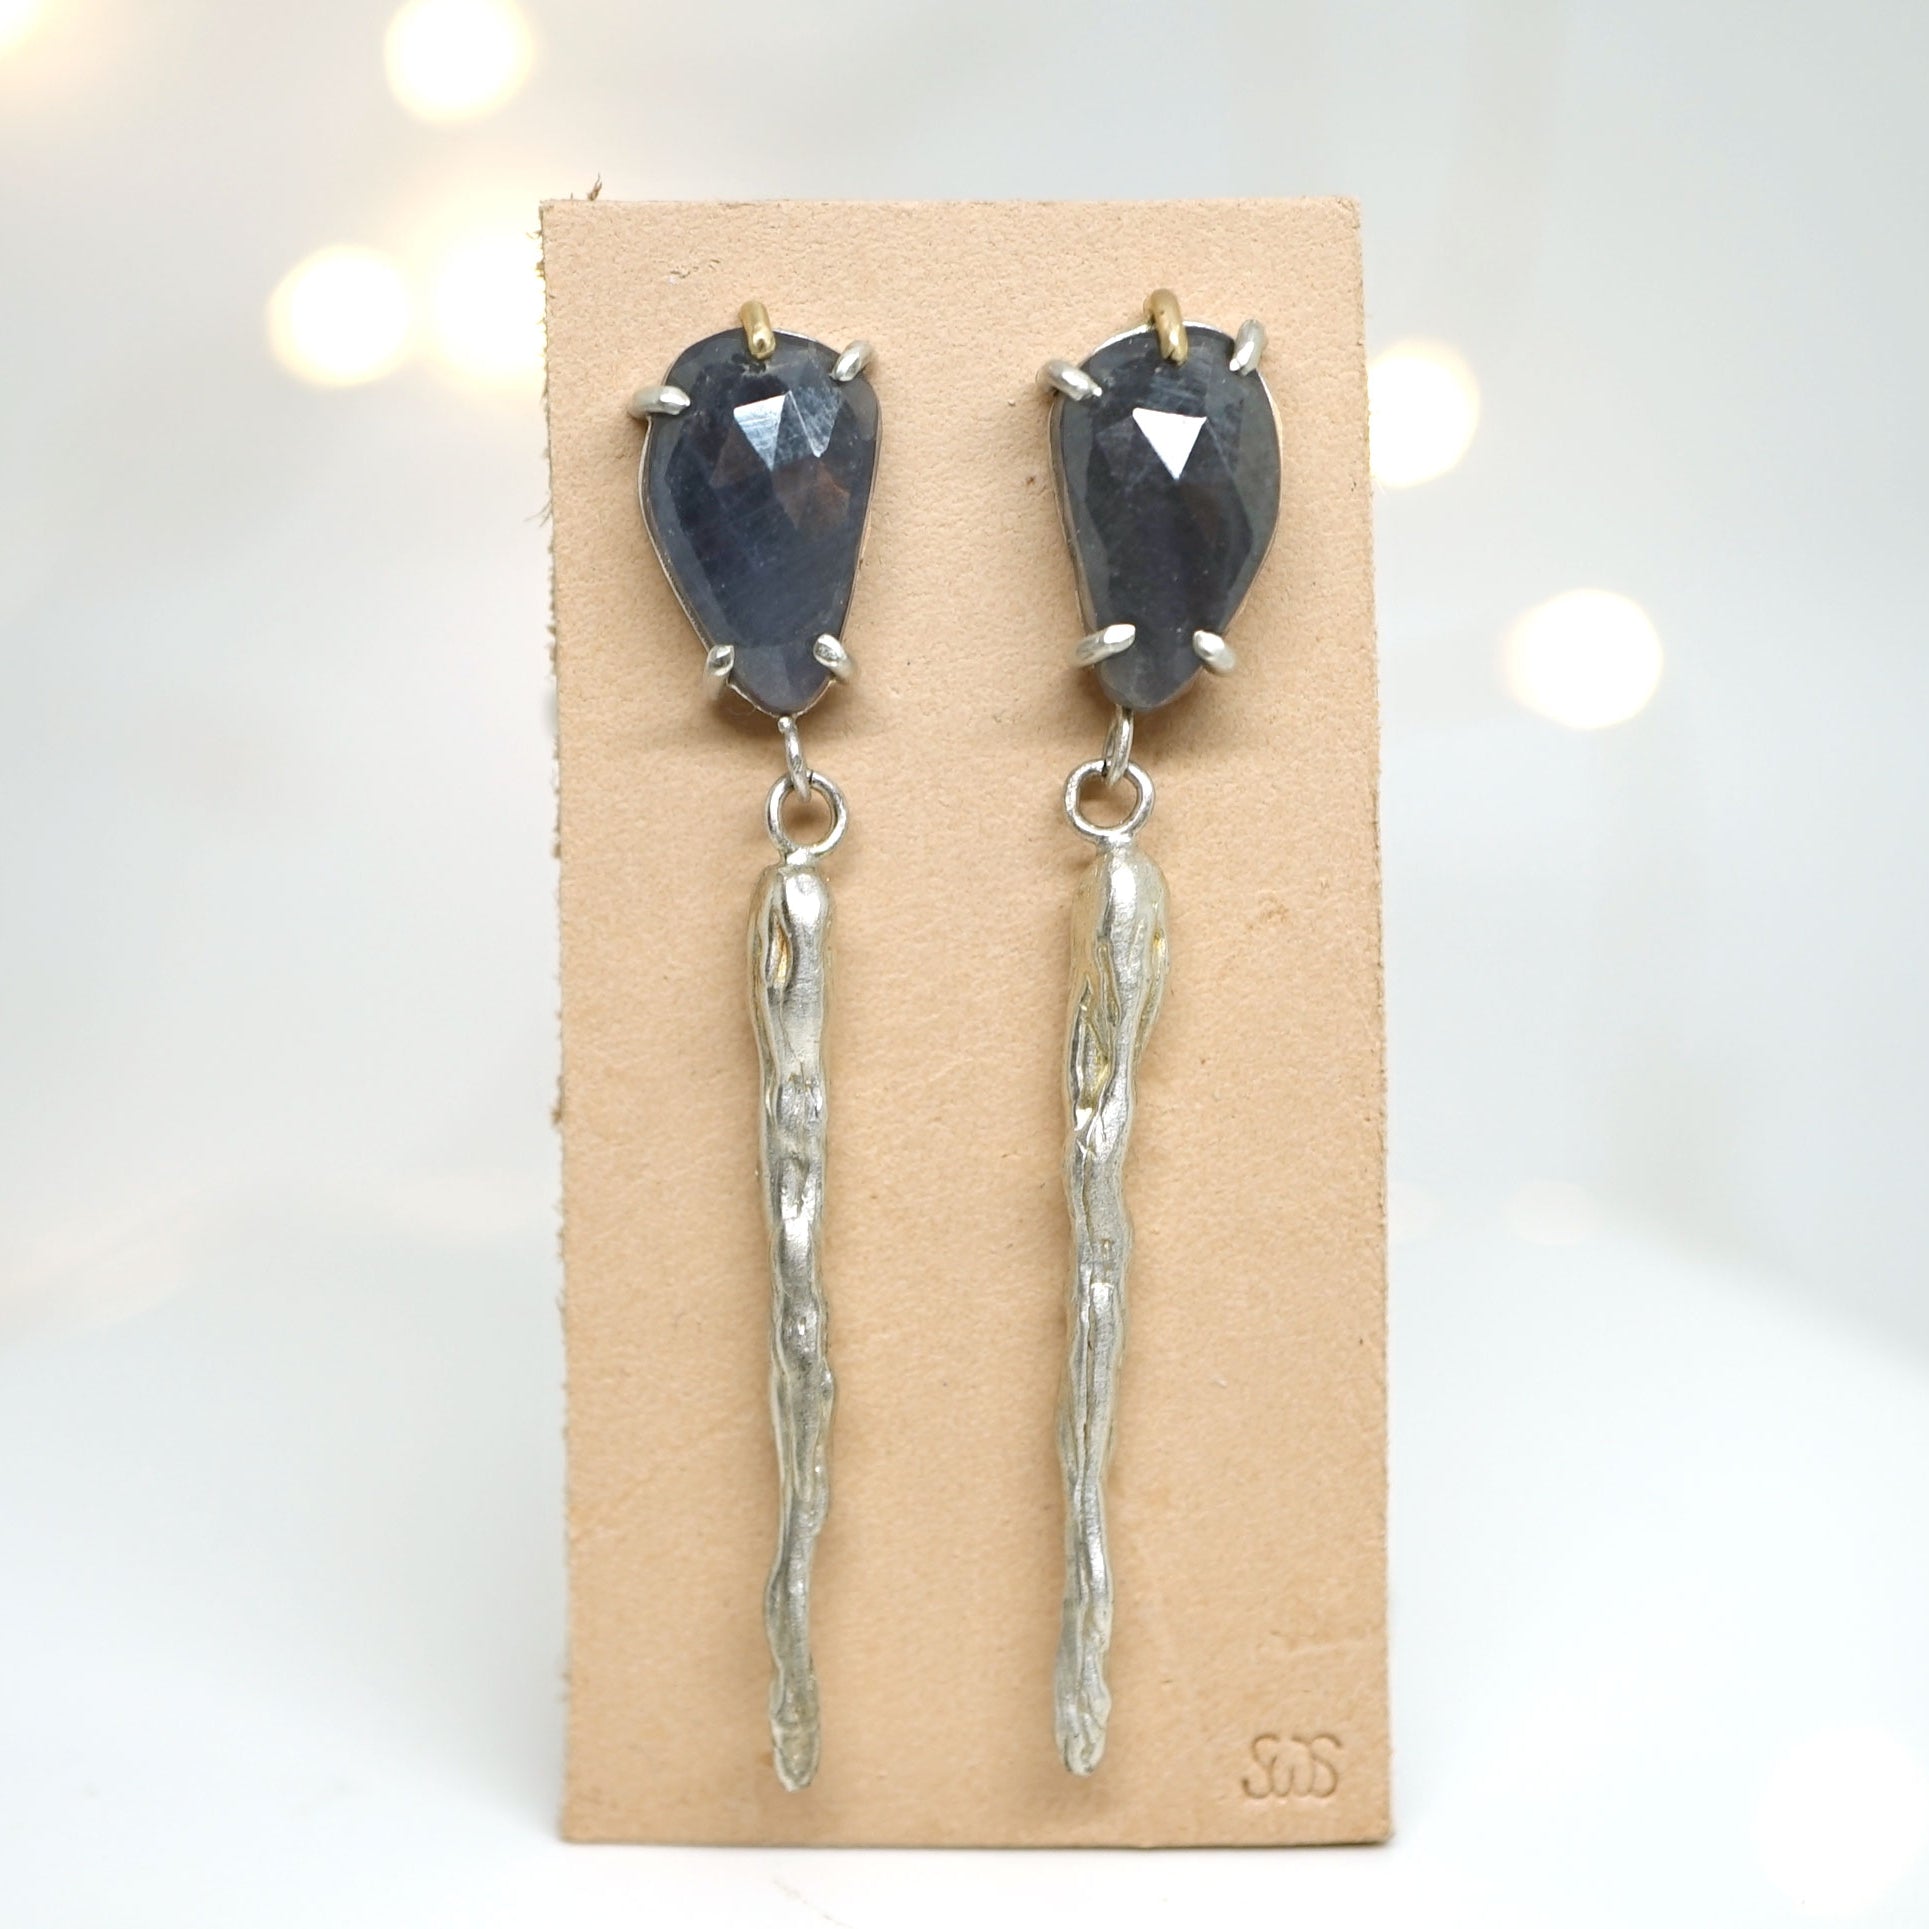 Sapphire earrings with silver drops